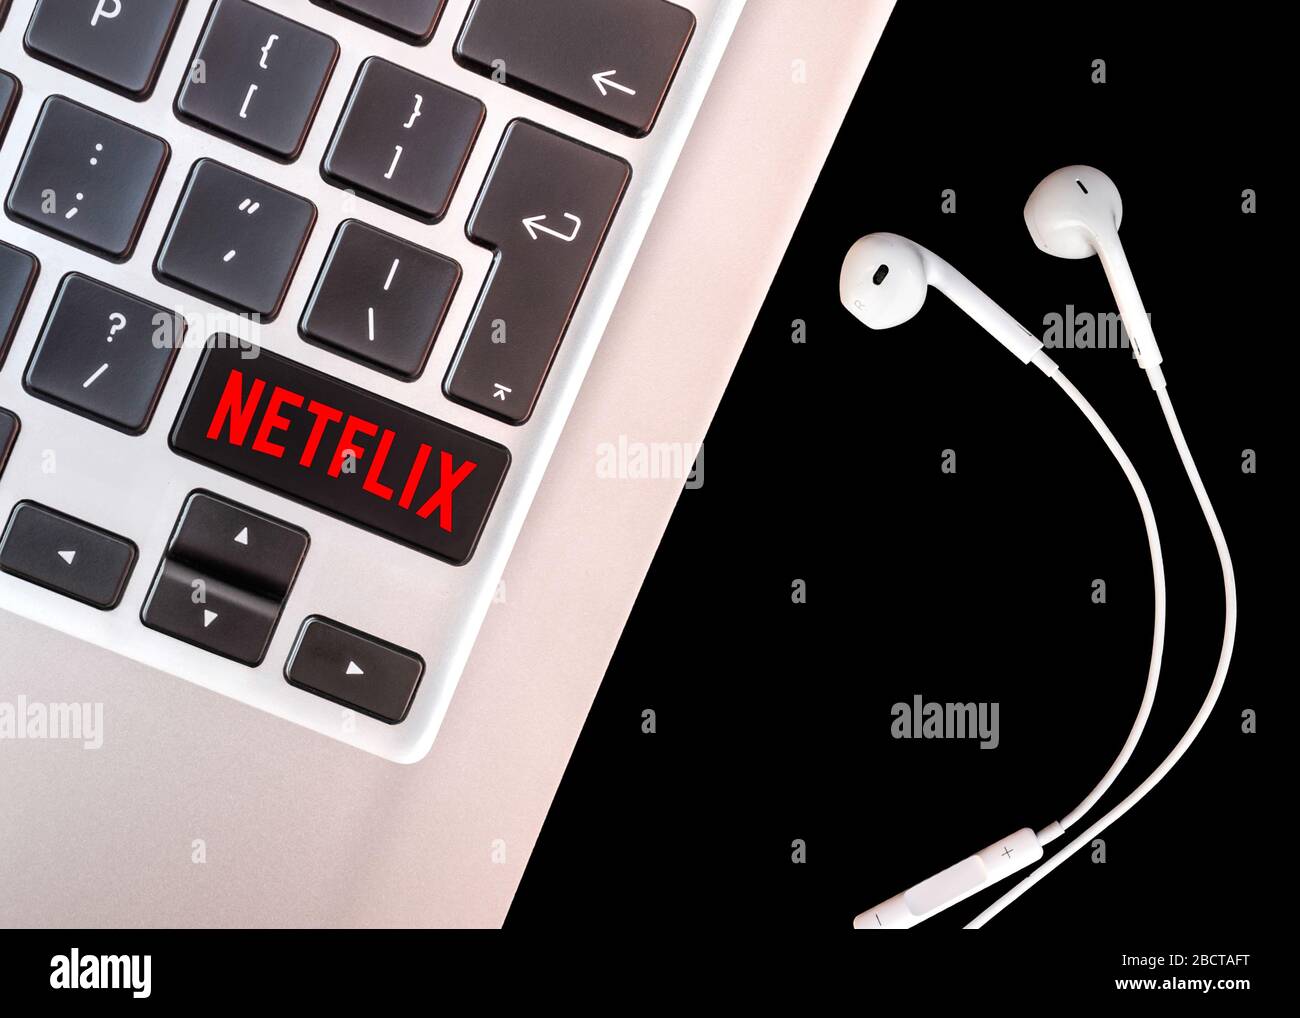 Brussels, Belgium - 4 April 2020: Netflix logo on a laptop keyboard with headset. Stock Photo